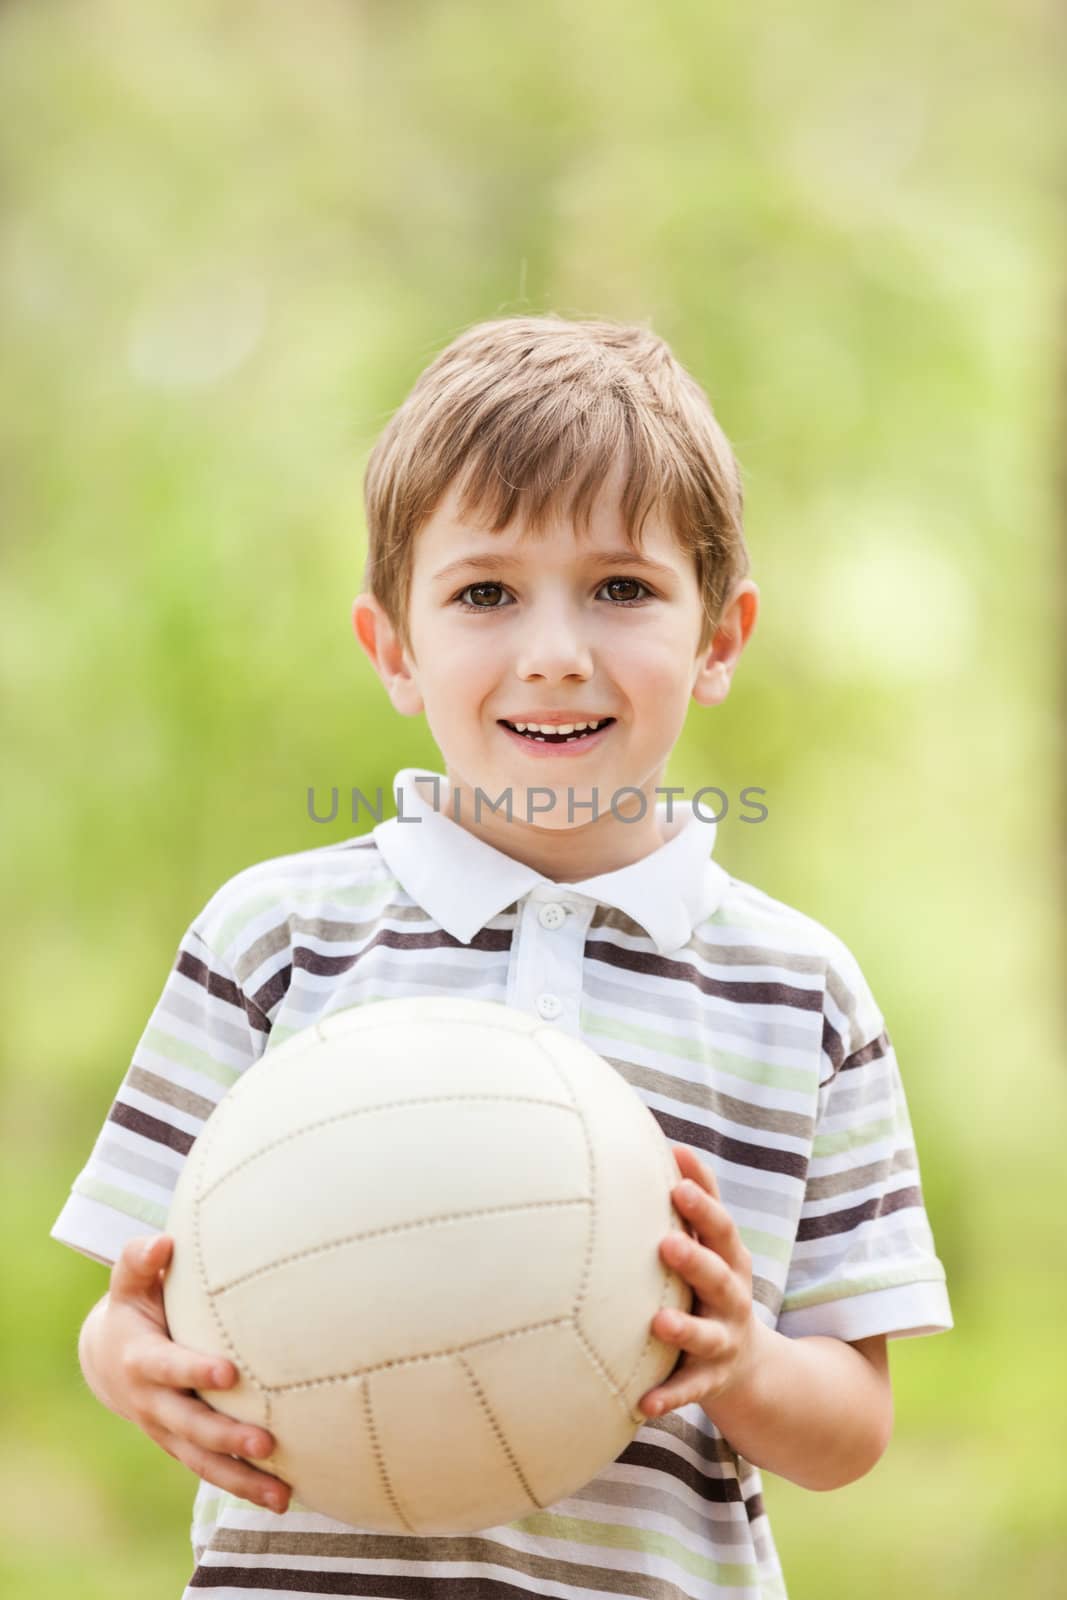 Child with soccer ball by ia_64